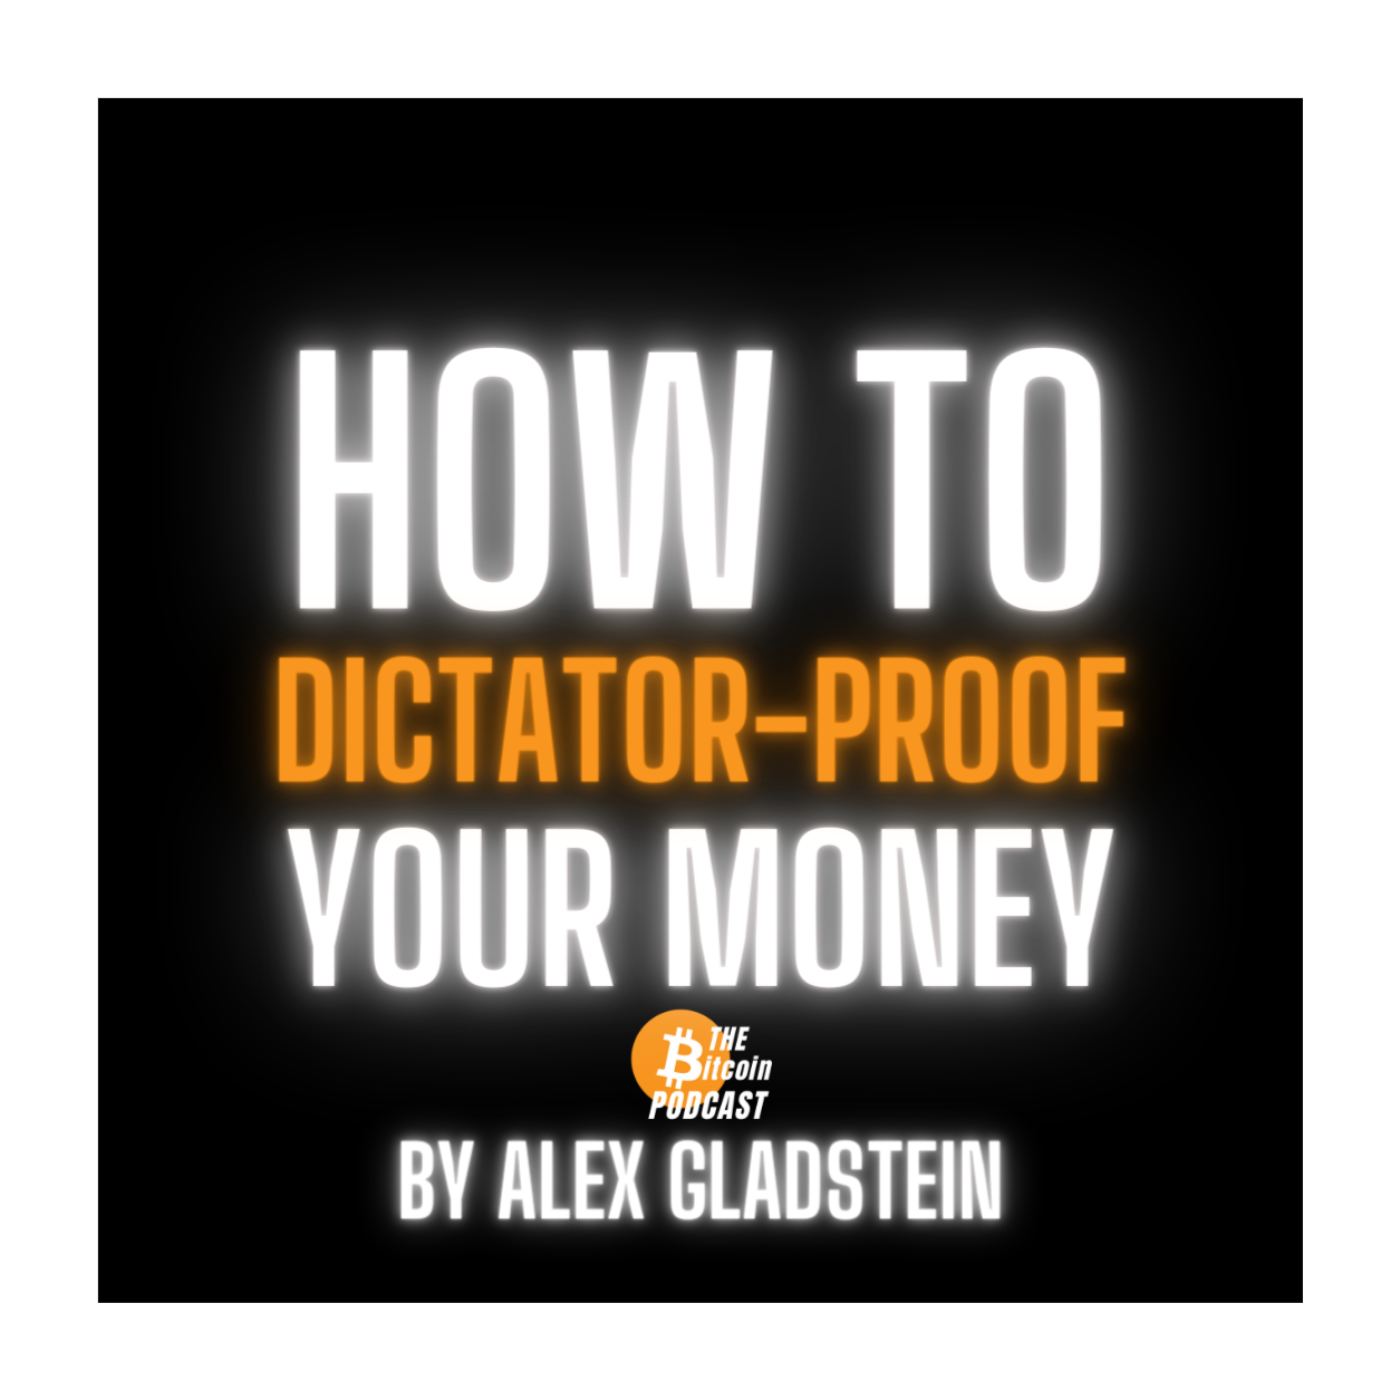 How to Dictator-Proof Your Money, By Alex Gladstein